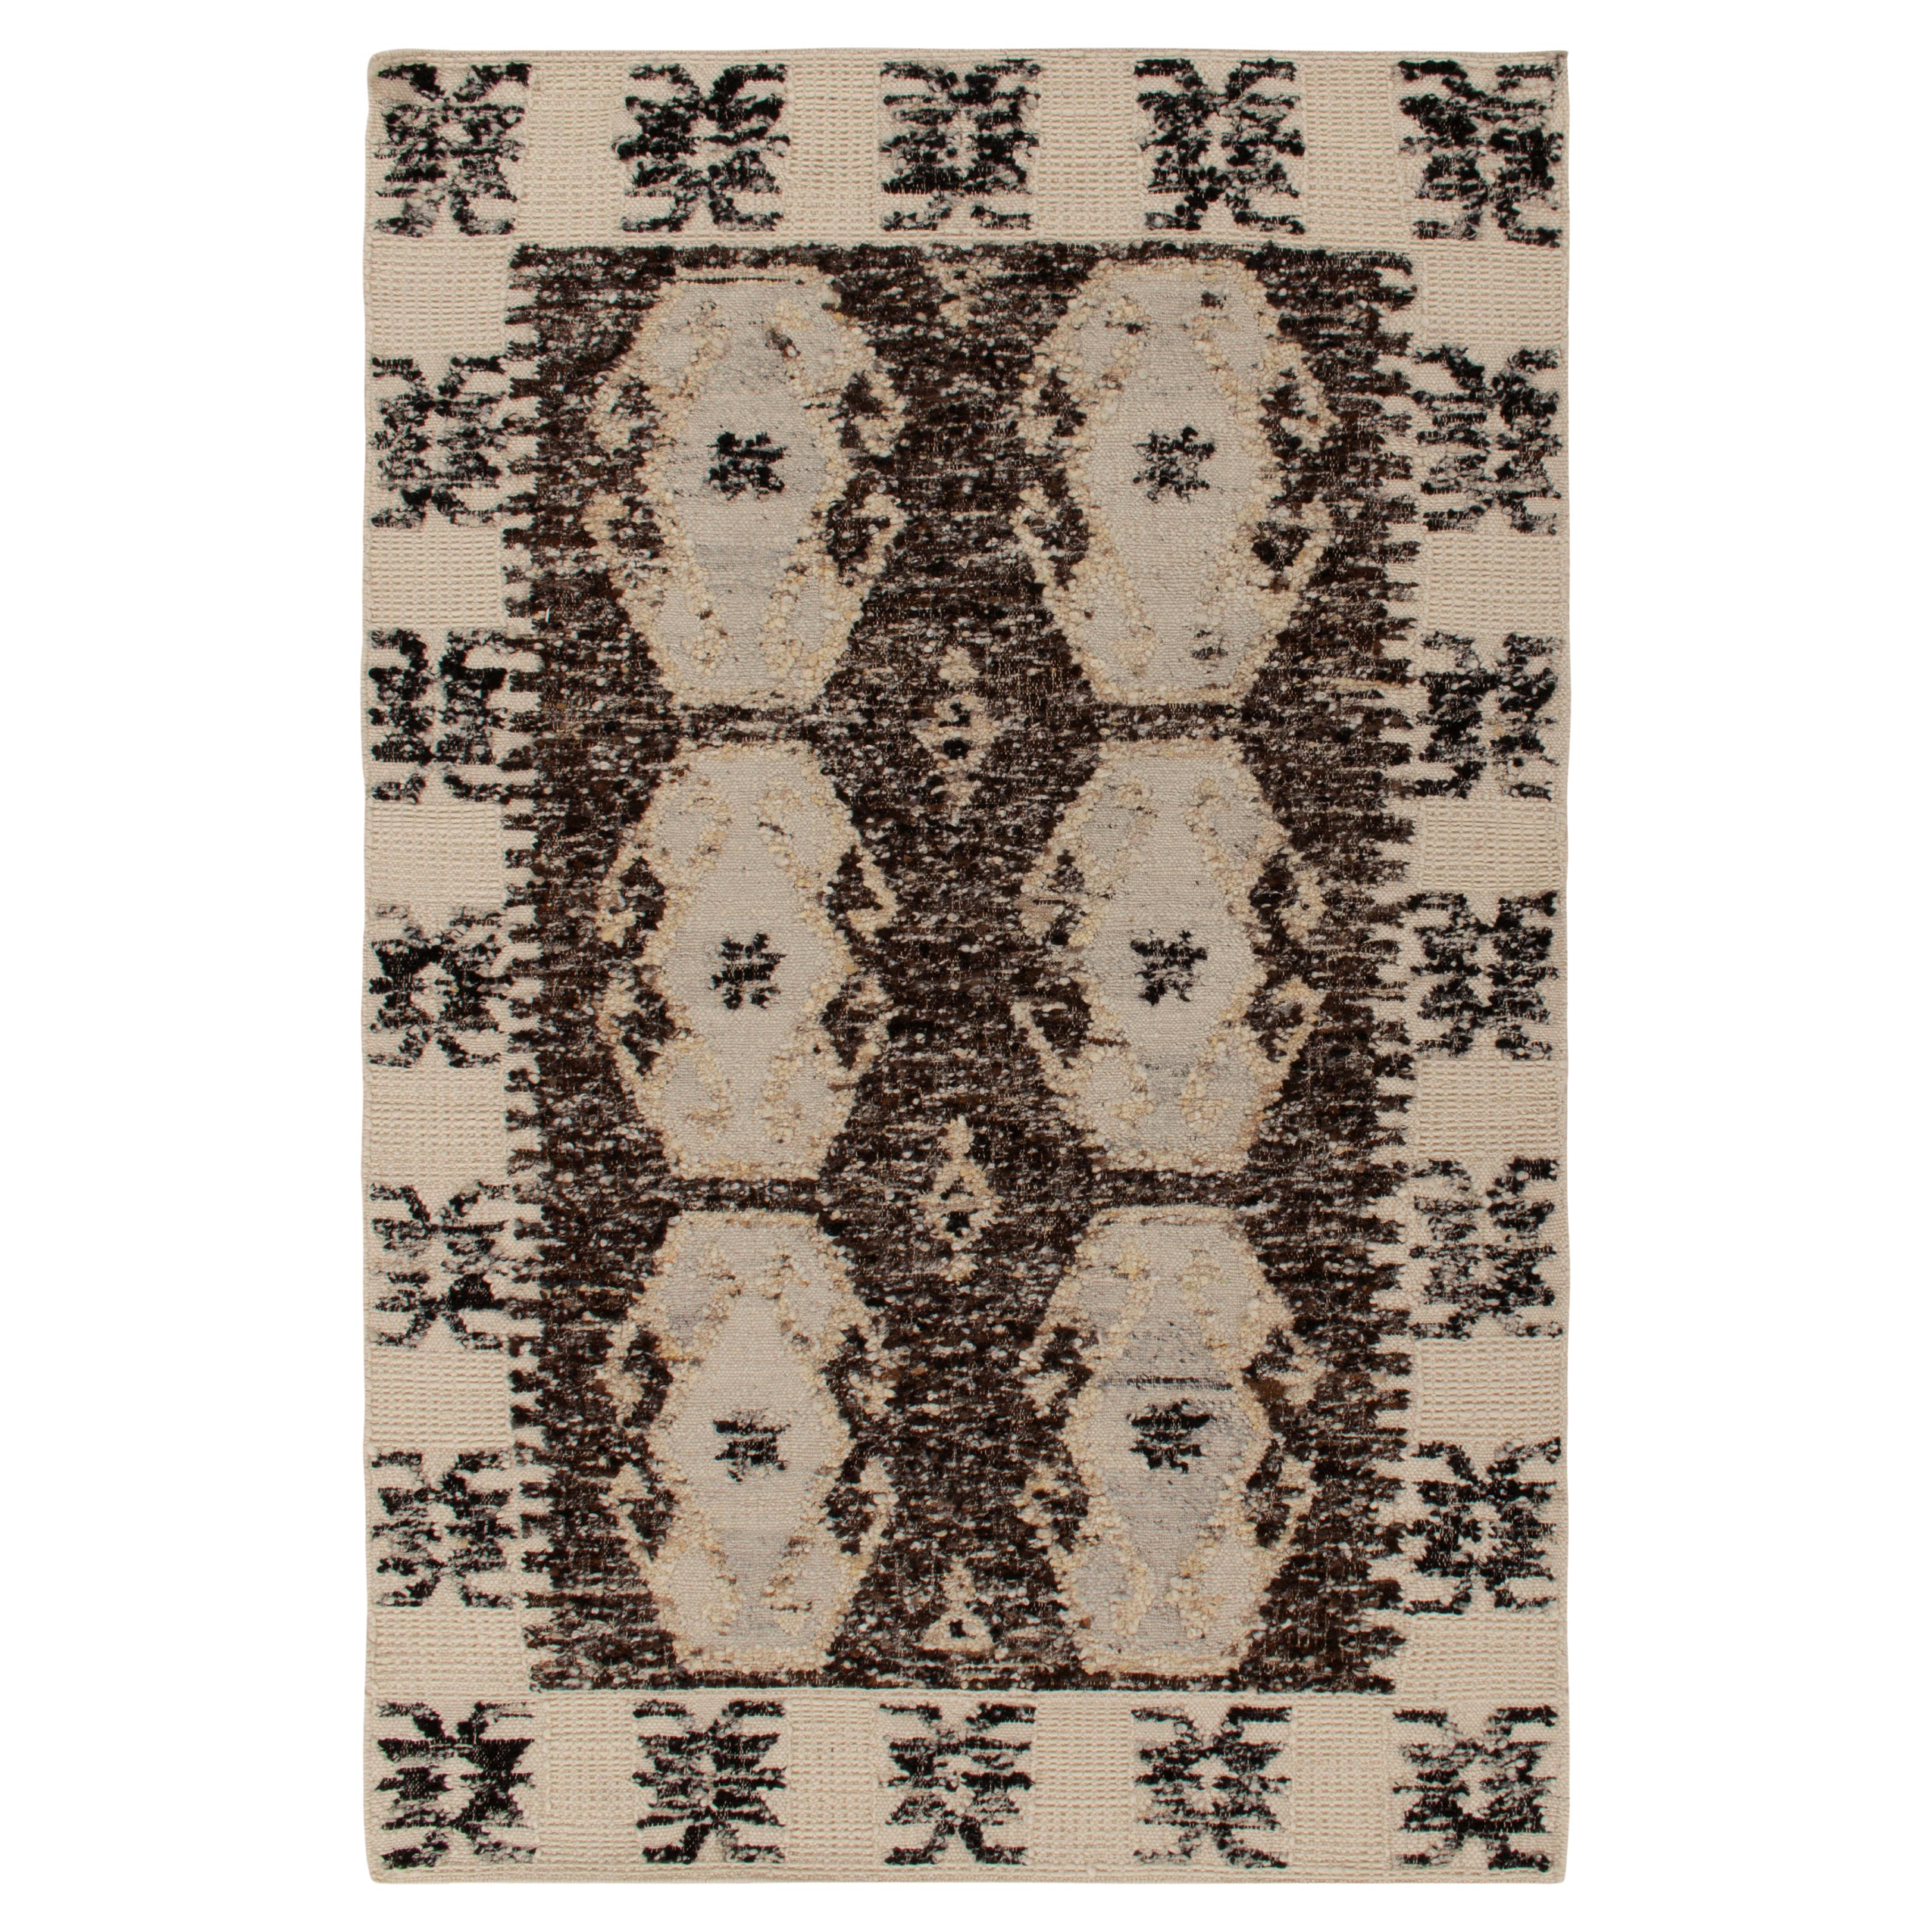 Rug & Kilim's Textural Contemporary Kilim Rug in Beige-Brown, White and Black 